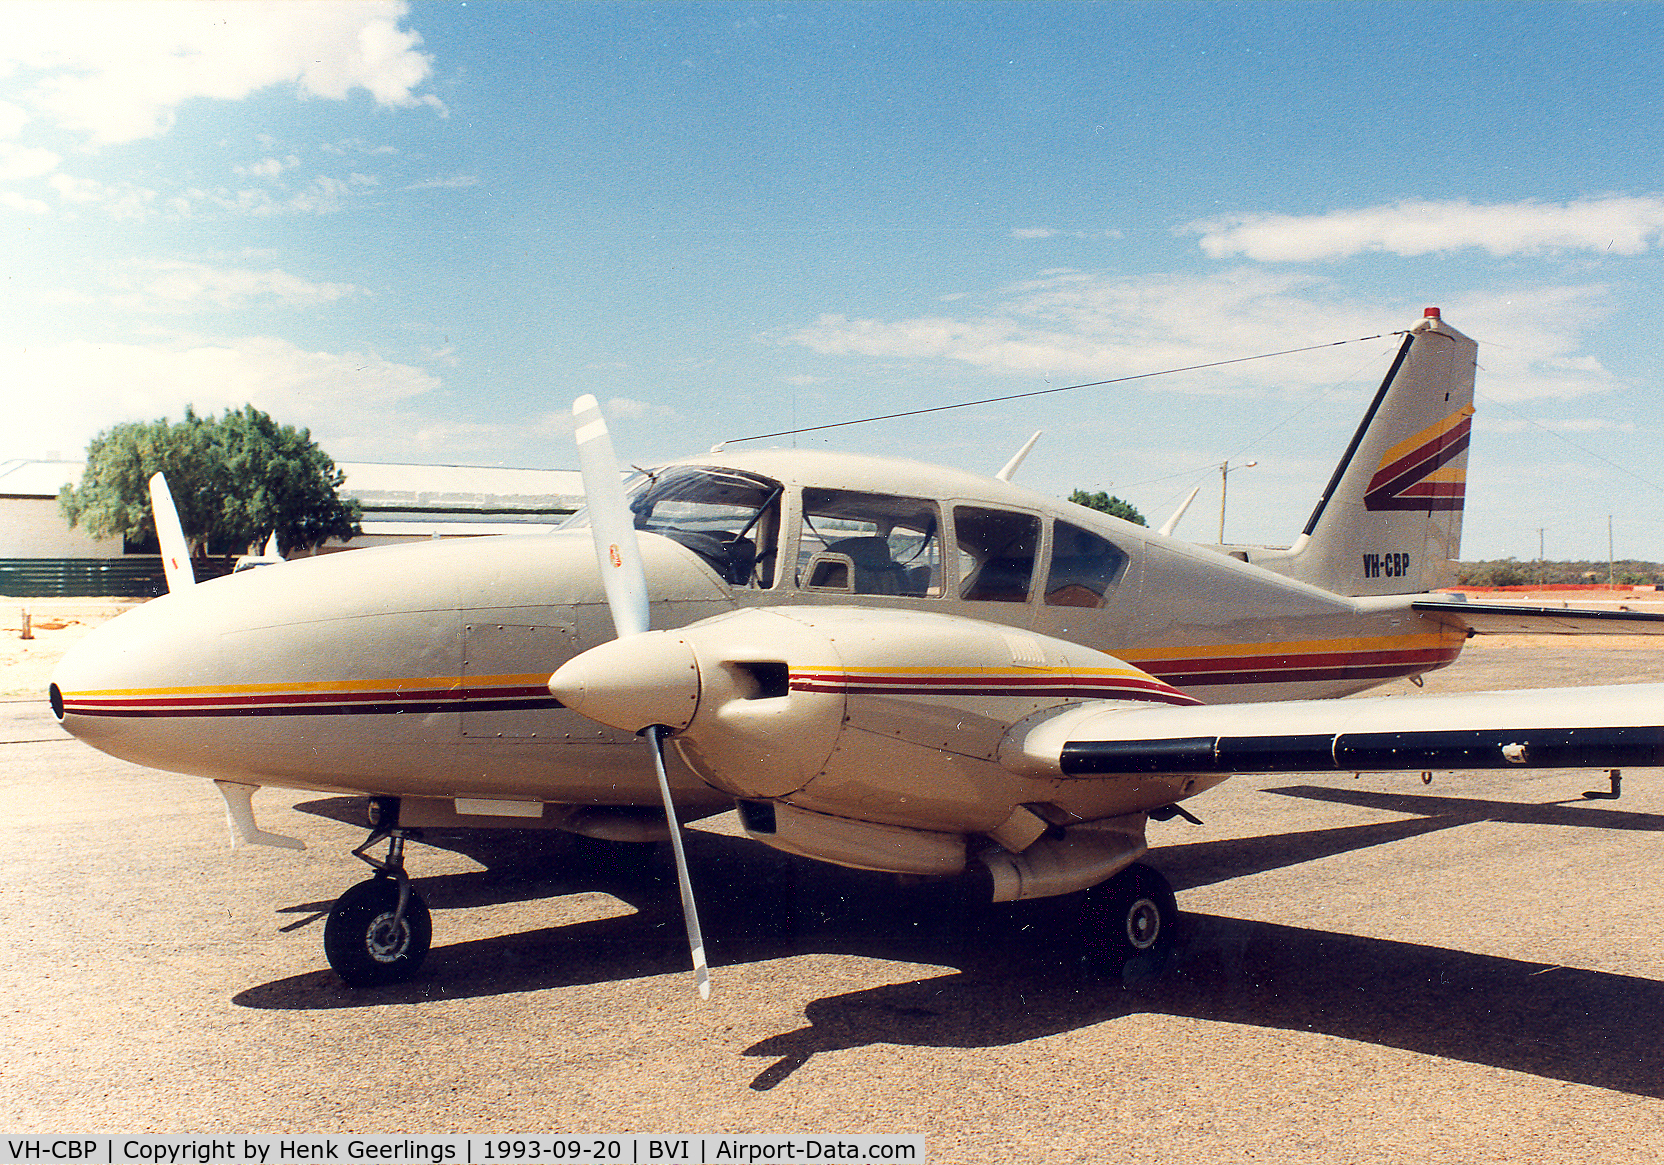 VH-CBP, 1965 Piper PA-23-250 Aztec C C/N 27-2875, Charter for the Army